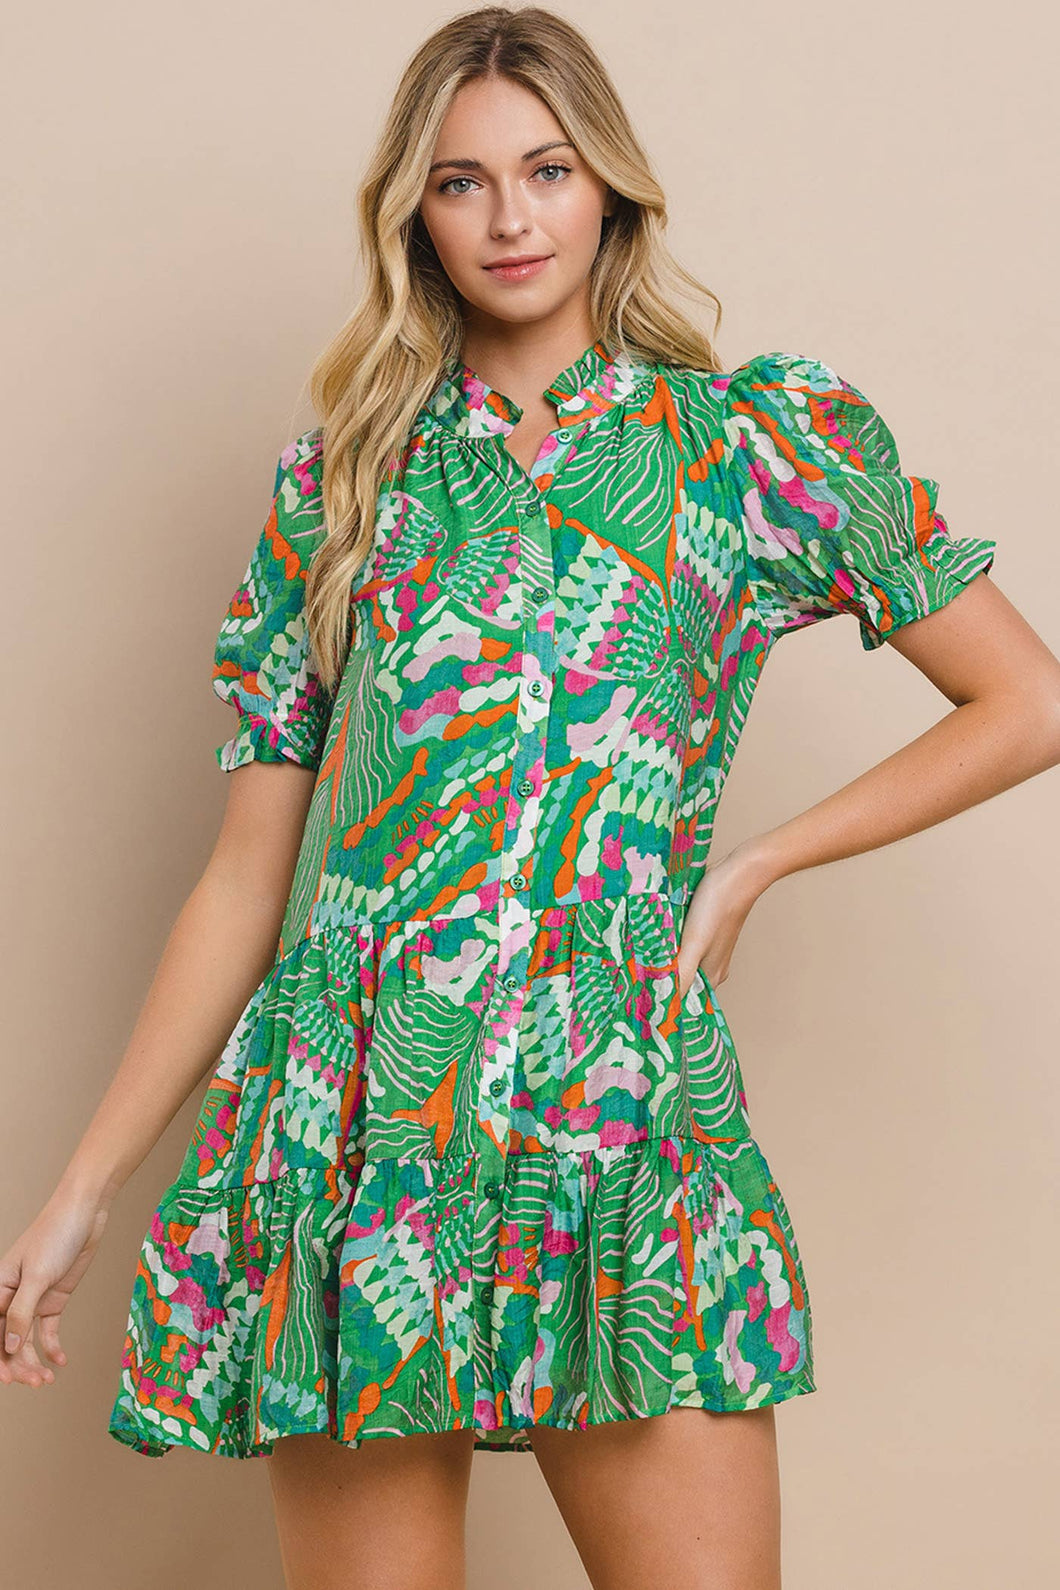 Abstract Printed Button Up Dress